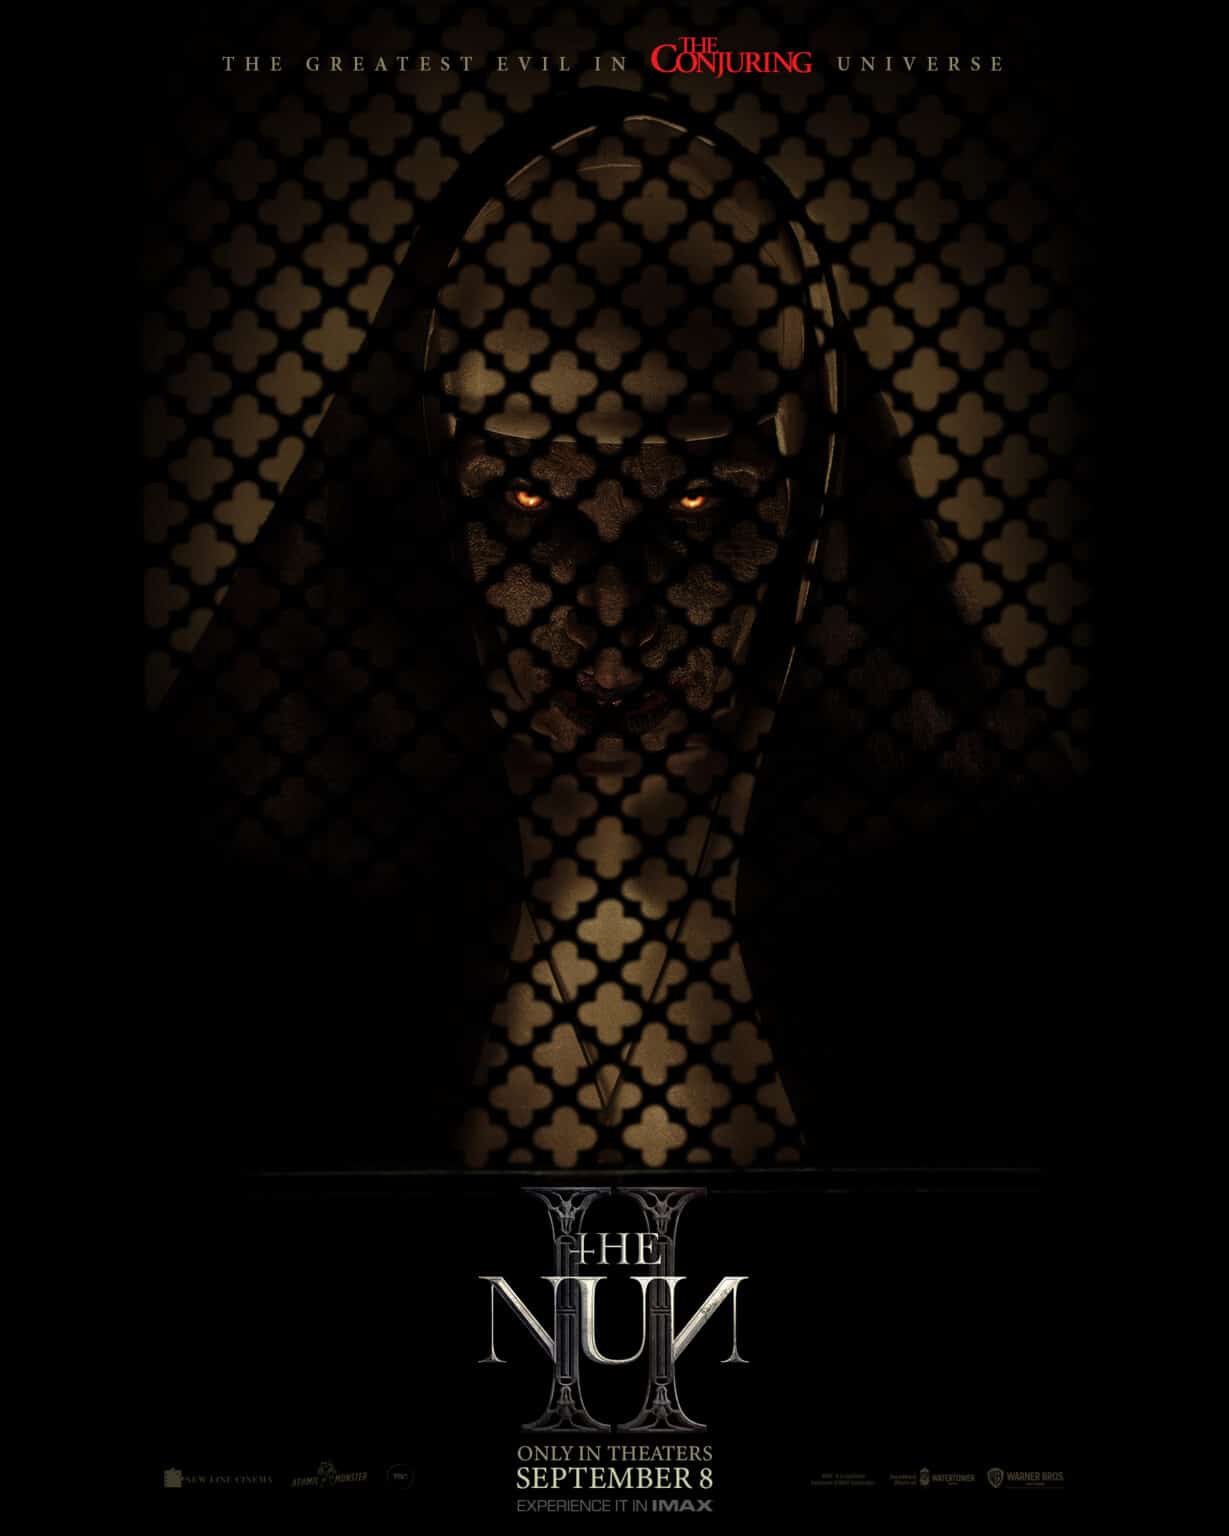 The Nun 2: latest Conjuring Universe film promoted with three TV spots